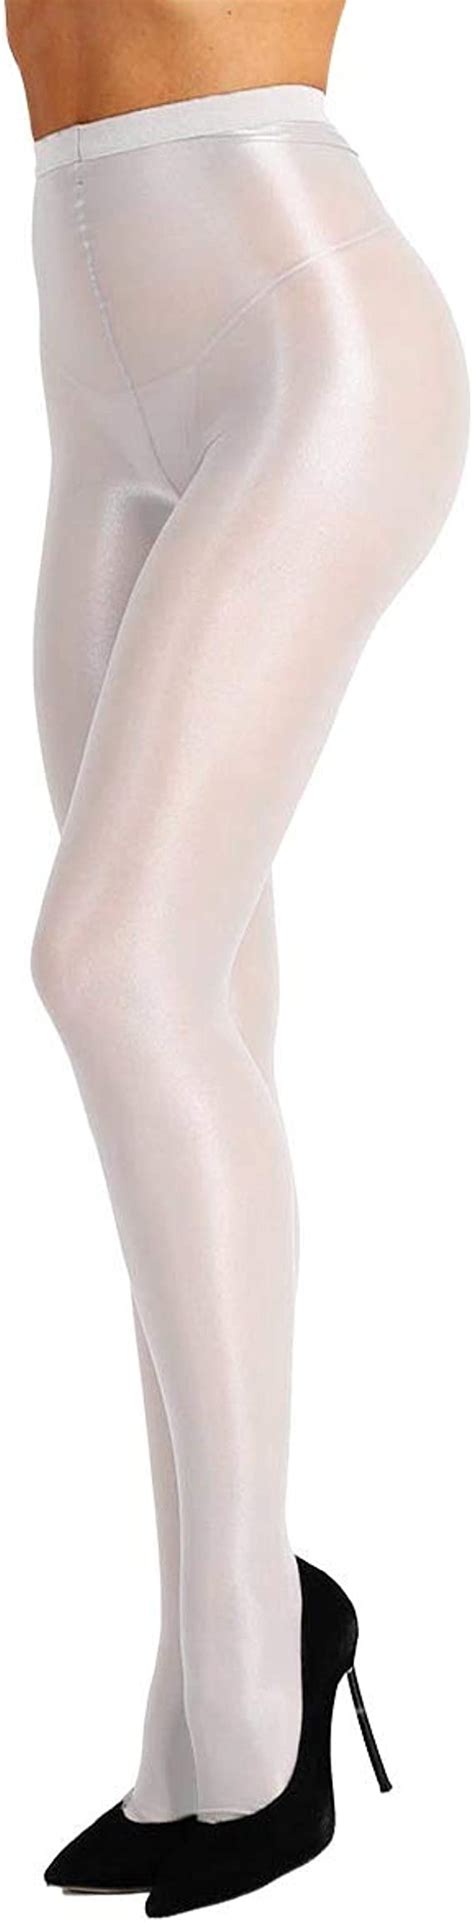 Agoky Womens Sheer Semi Opaque Footed Pantyhose Tights High Waist Shimmery Silky Hosiery